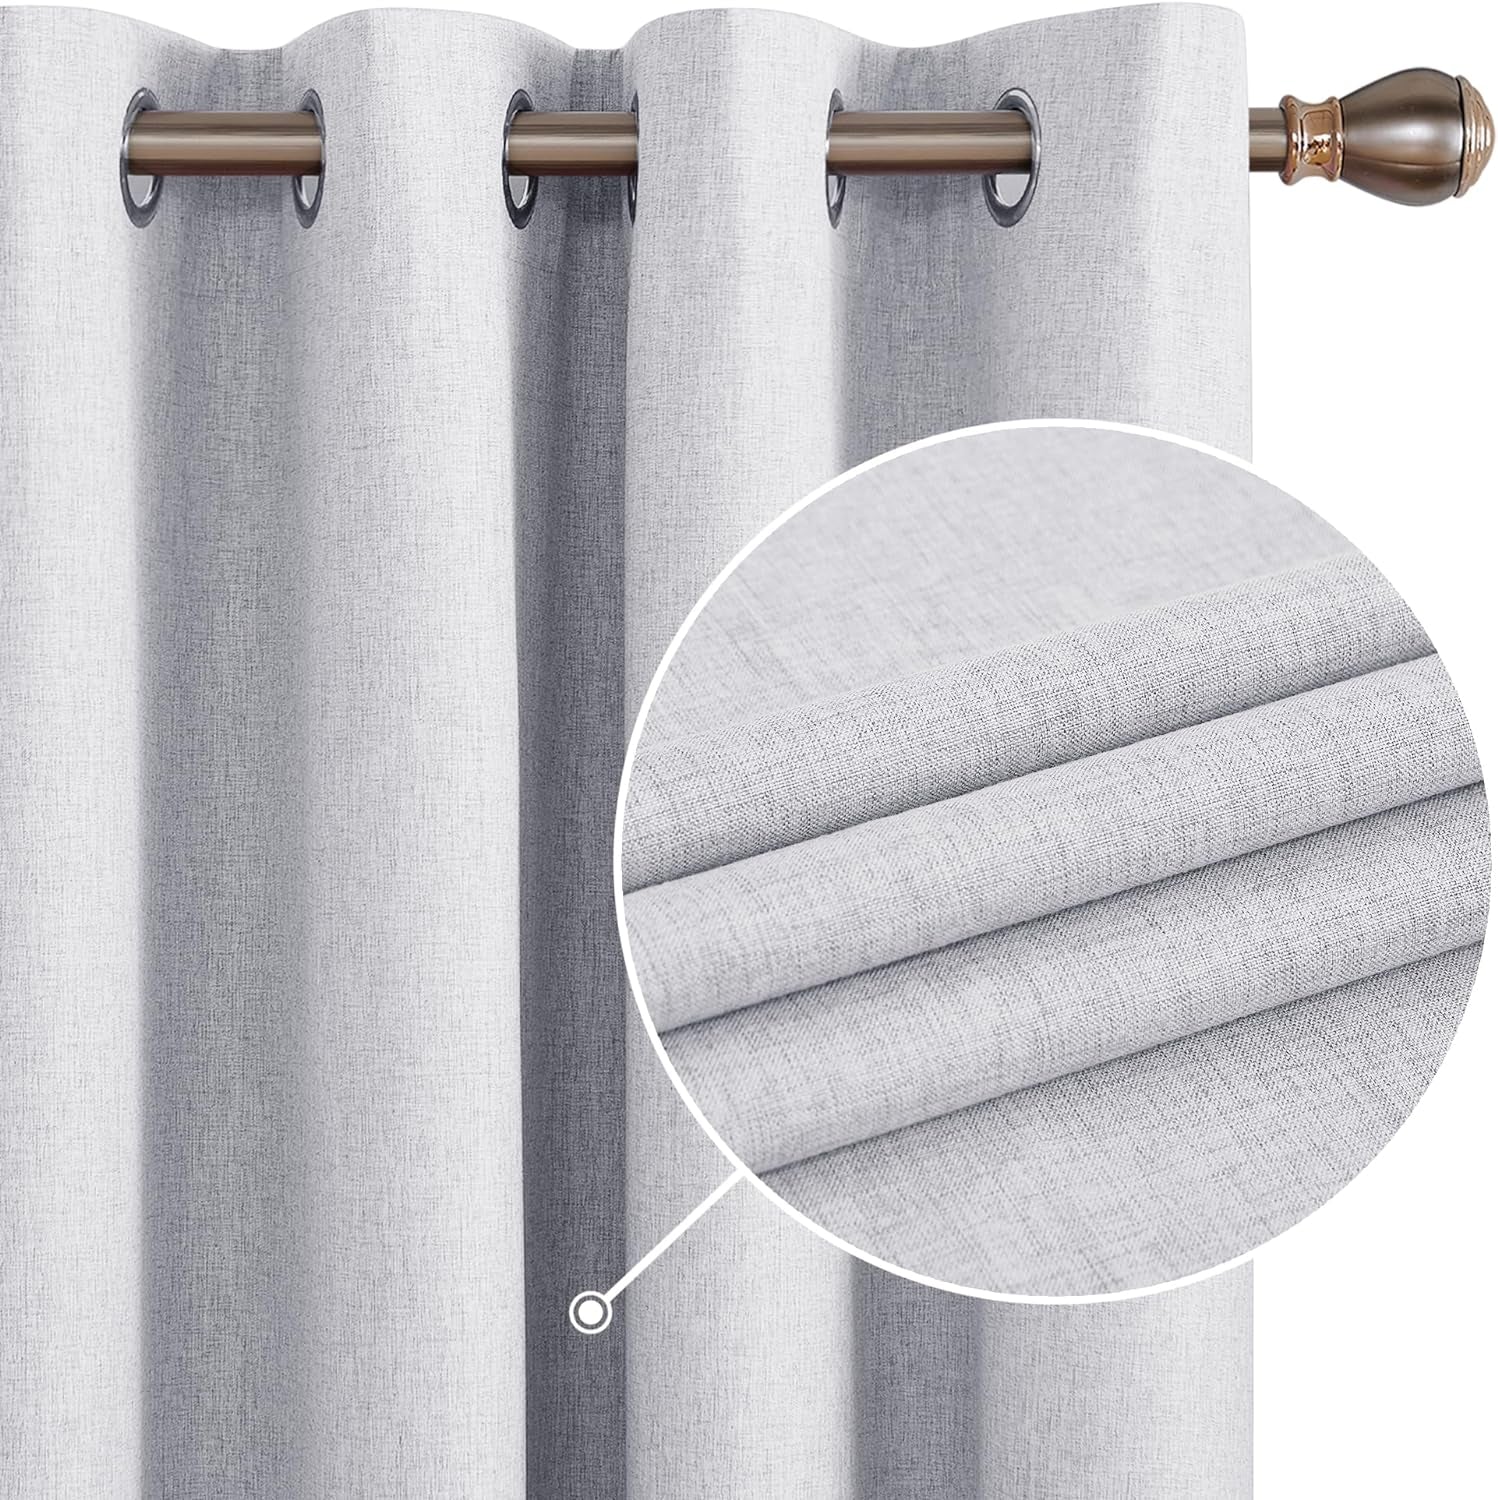 Deconovo Linen Blackout Curtains 84 Inch Length Set of 2, Thermal Curtain Drapes with Grey Coating, Total Light Blocking Waterproof Curtains for Indoor/Outdoor (Light Grey, 52W X 84L Inch)  Deconovo   